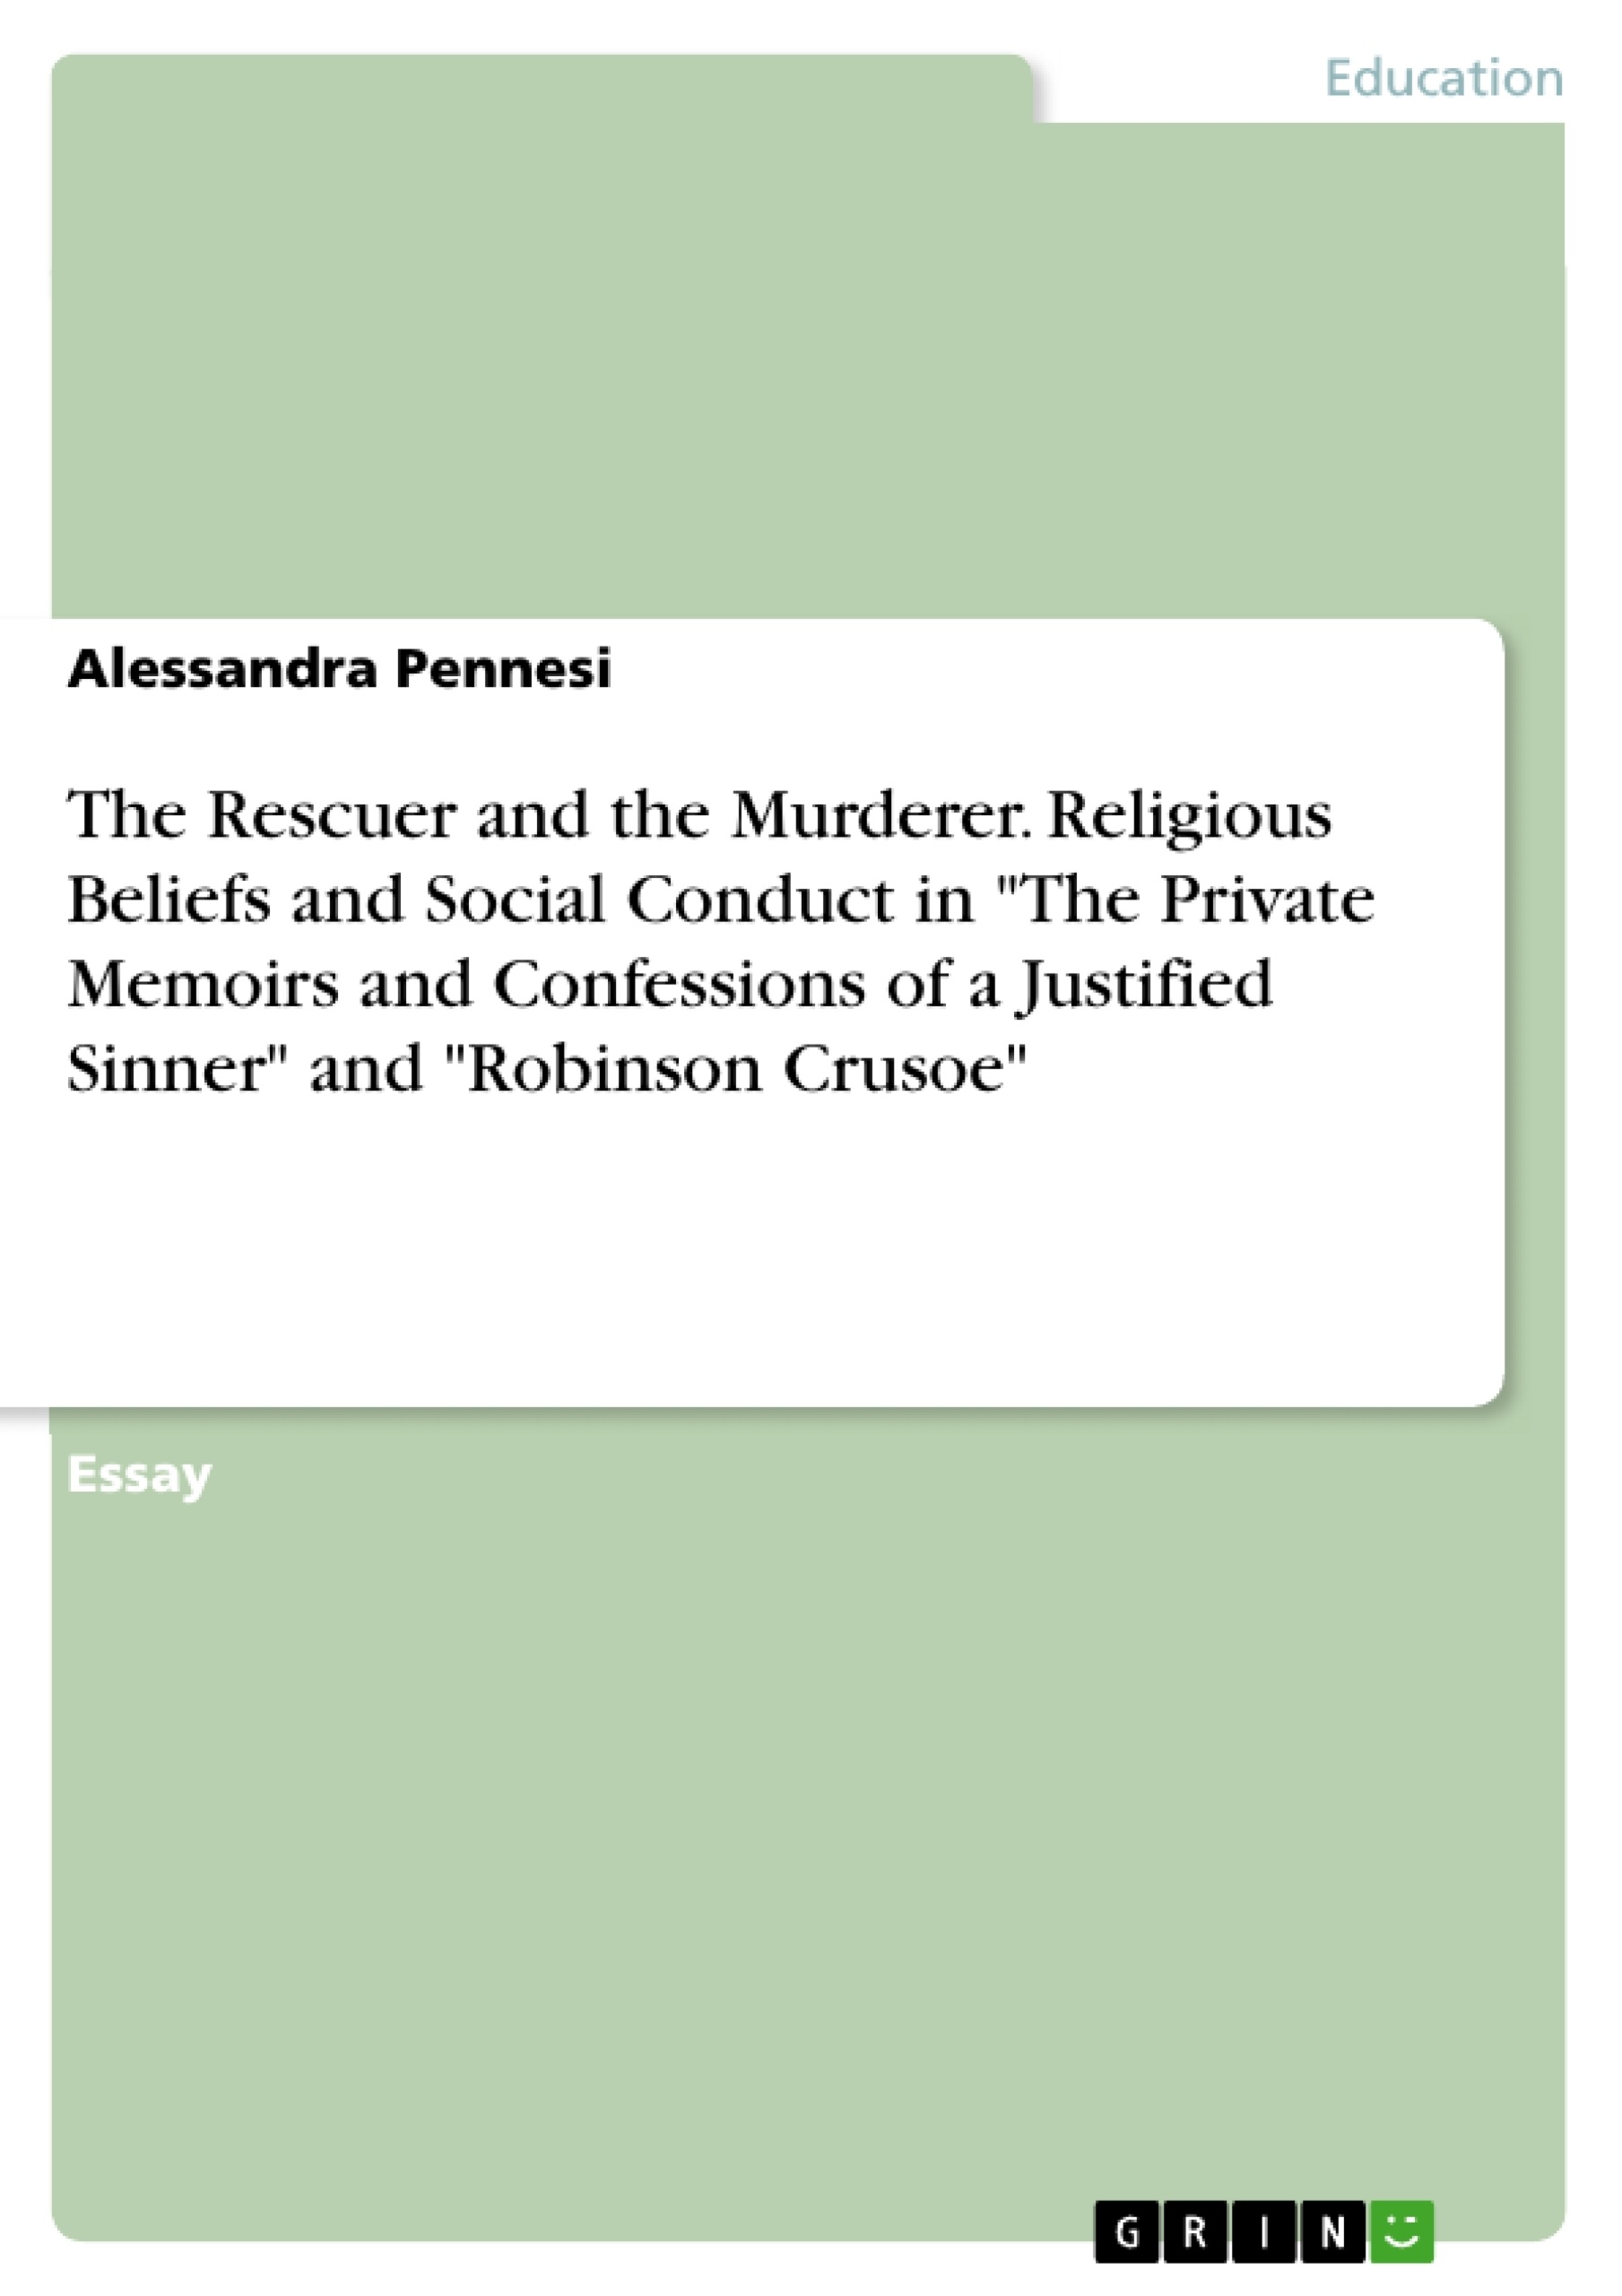 Titre: The Rescuer and the Murderer. Religious Beliefs and Social Conduct in "The Private Memoirs and Confessions of a Justified Sinner" and "Robinson Crusoe"